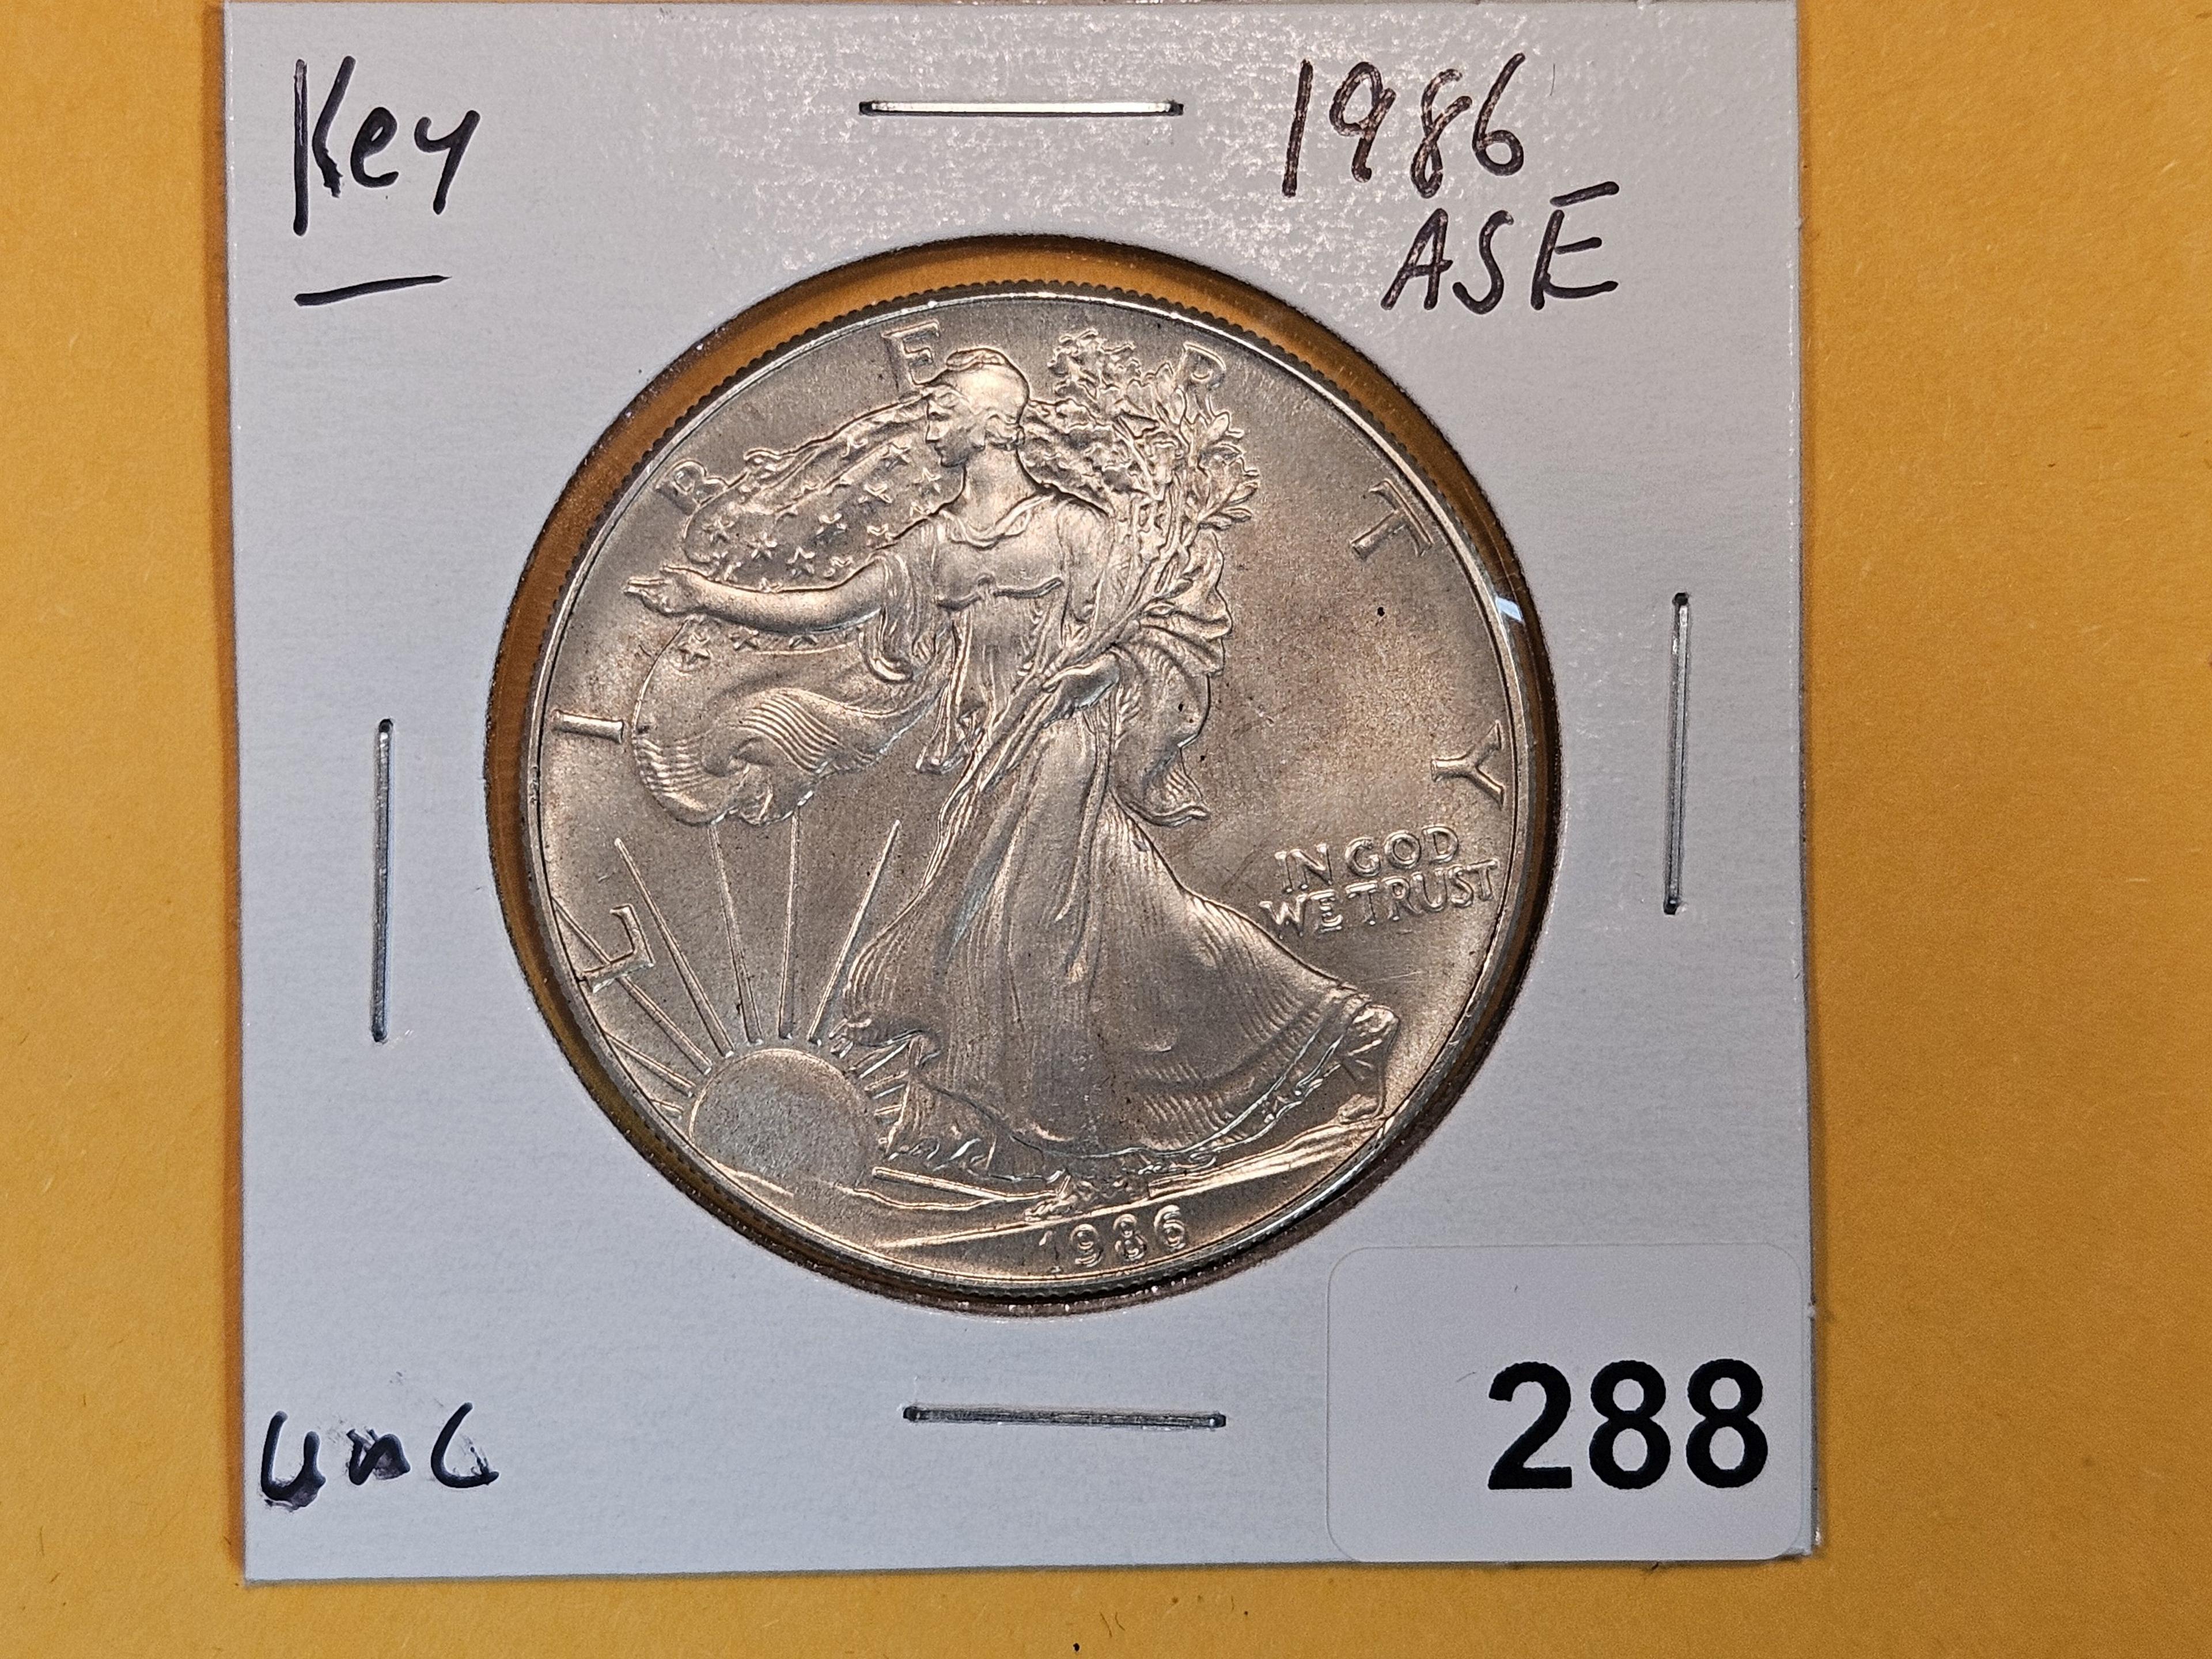 And last, but not least, a KEY DATE 1986 Uncirculated ASE